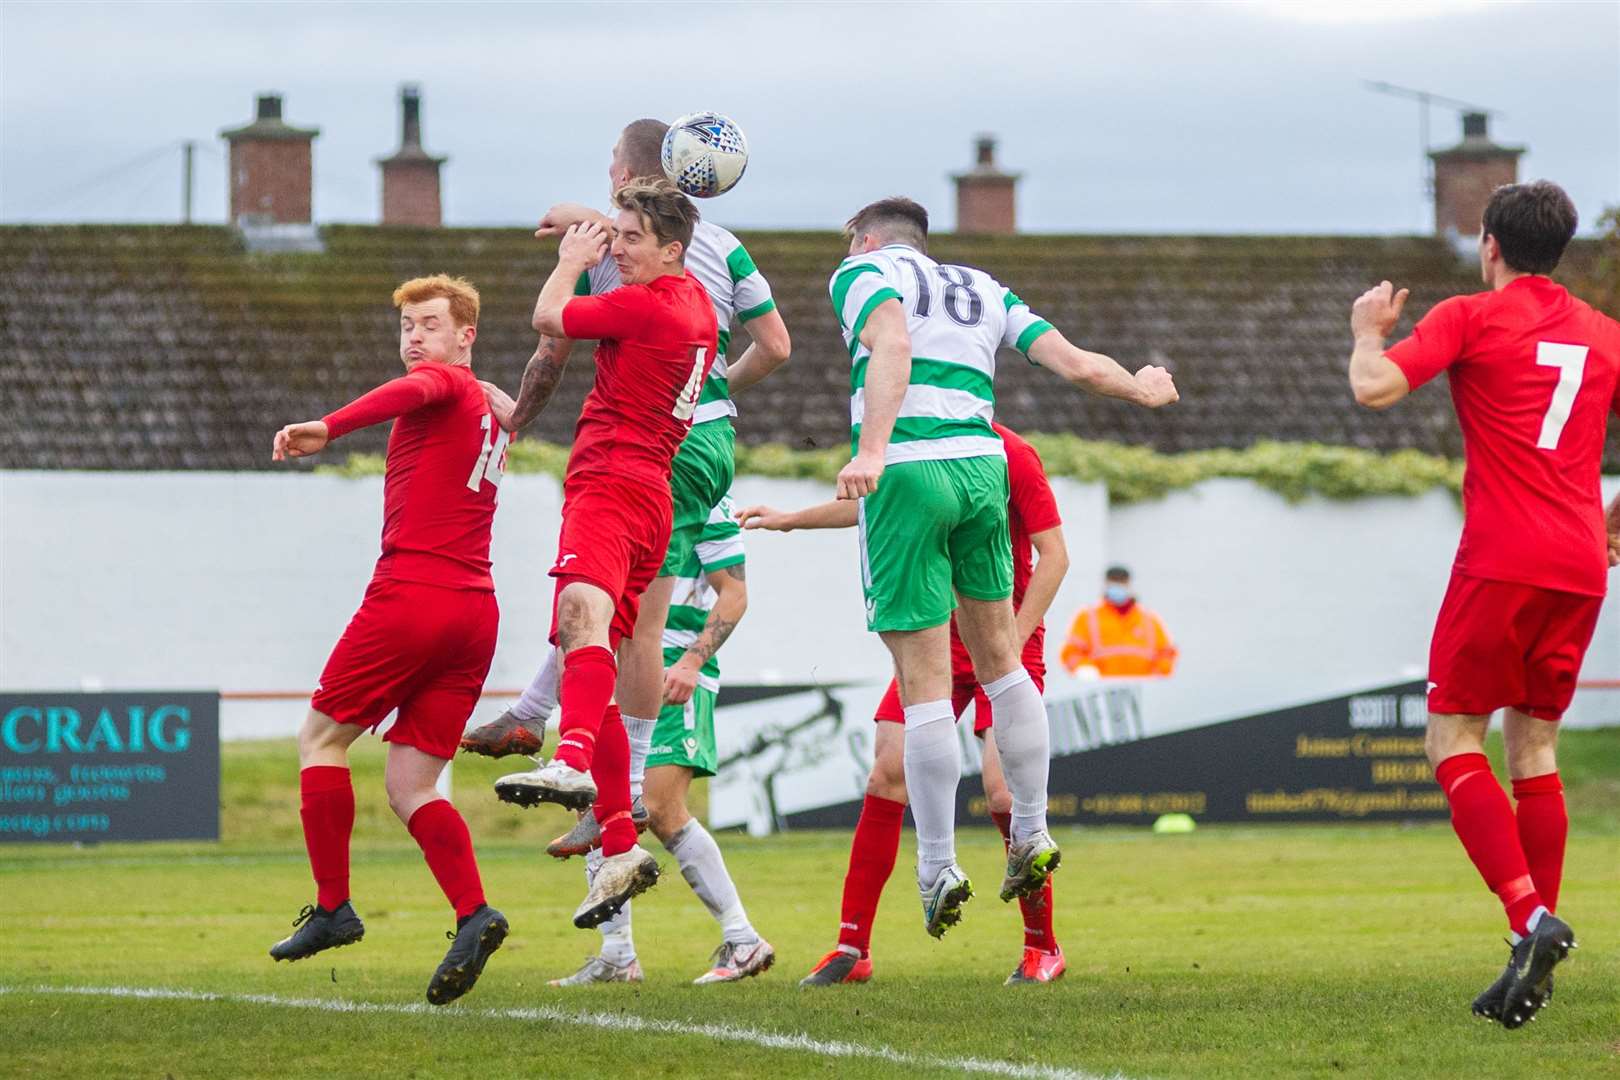 Buckie Thistle's Jack Murray fires his downwards header into the back of the net to make it 2-1 to the Jags. ..Brora Rangers FC (2) vs Buckie Thistle FC (2) - Buckie win 4-3 on penalties - Highland League Cup Semi Final - Dudgeon Park, Brora 18/10/2020...Picture: Daniel Forsyth..